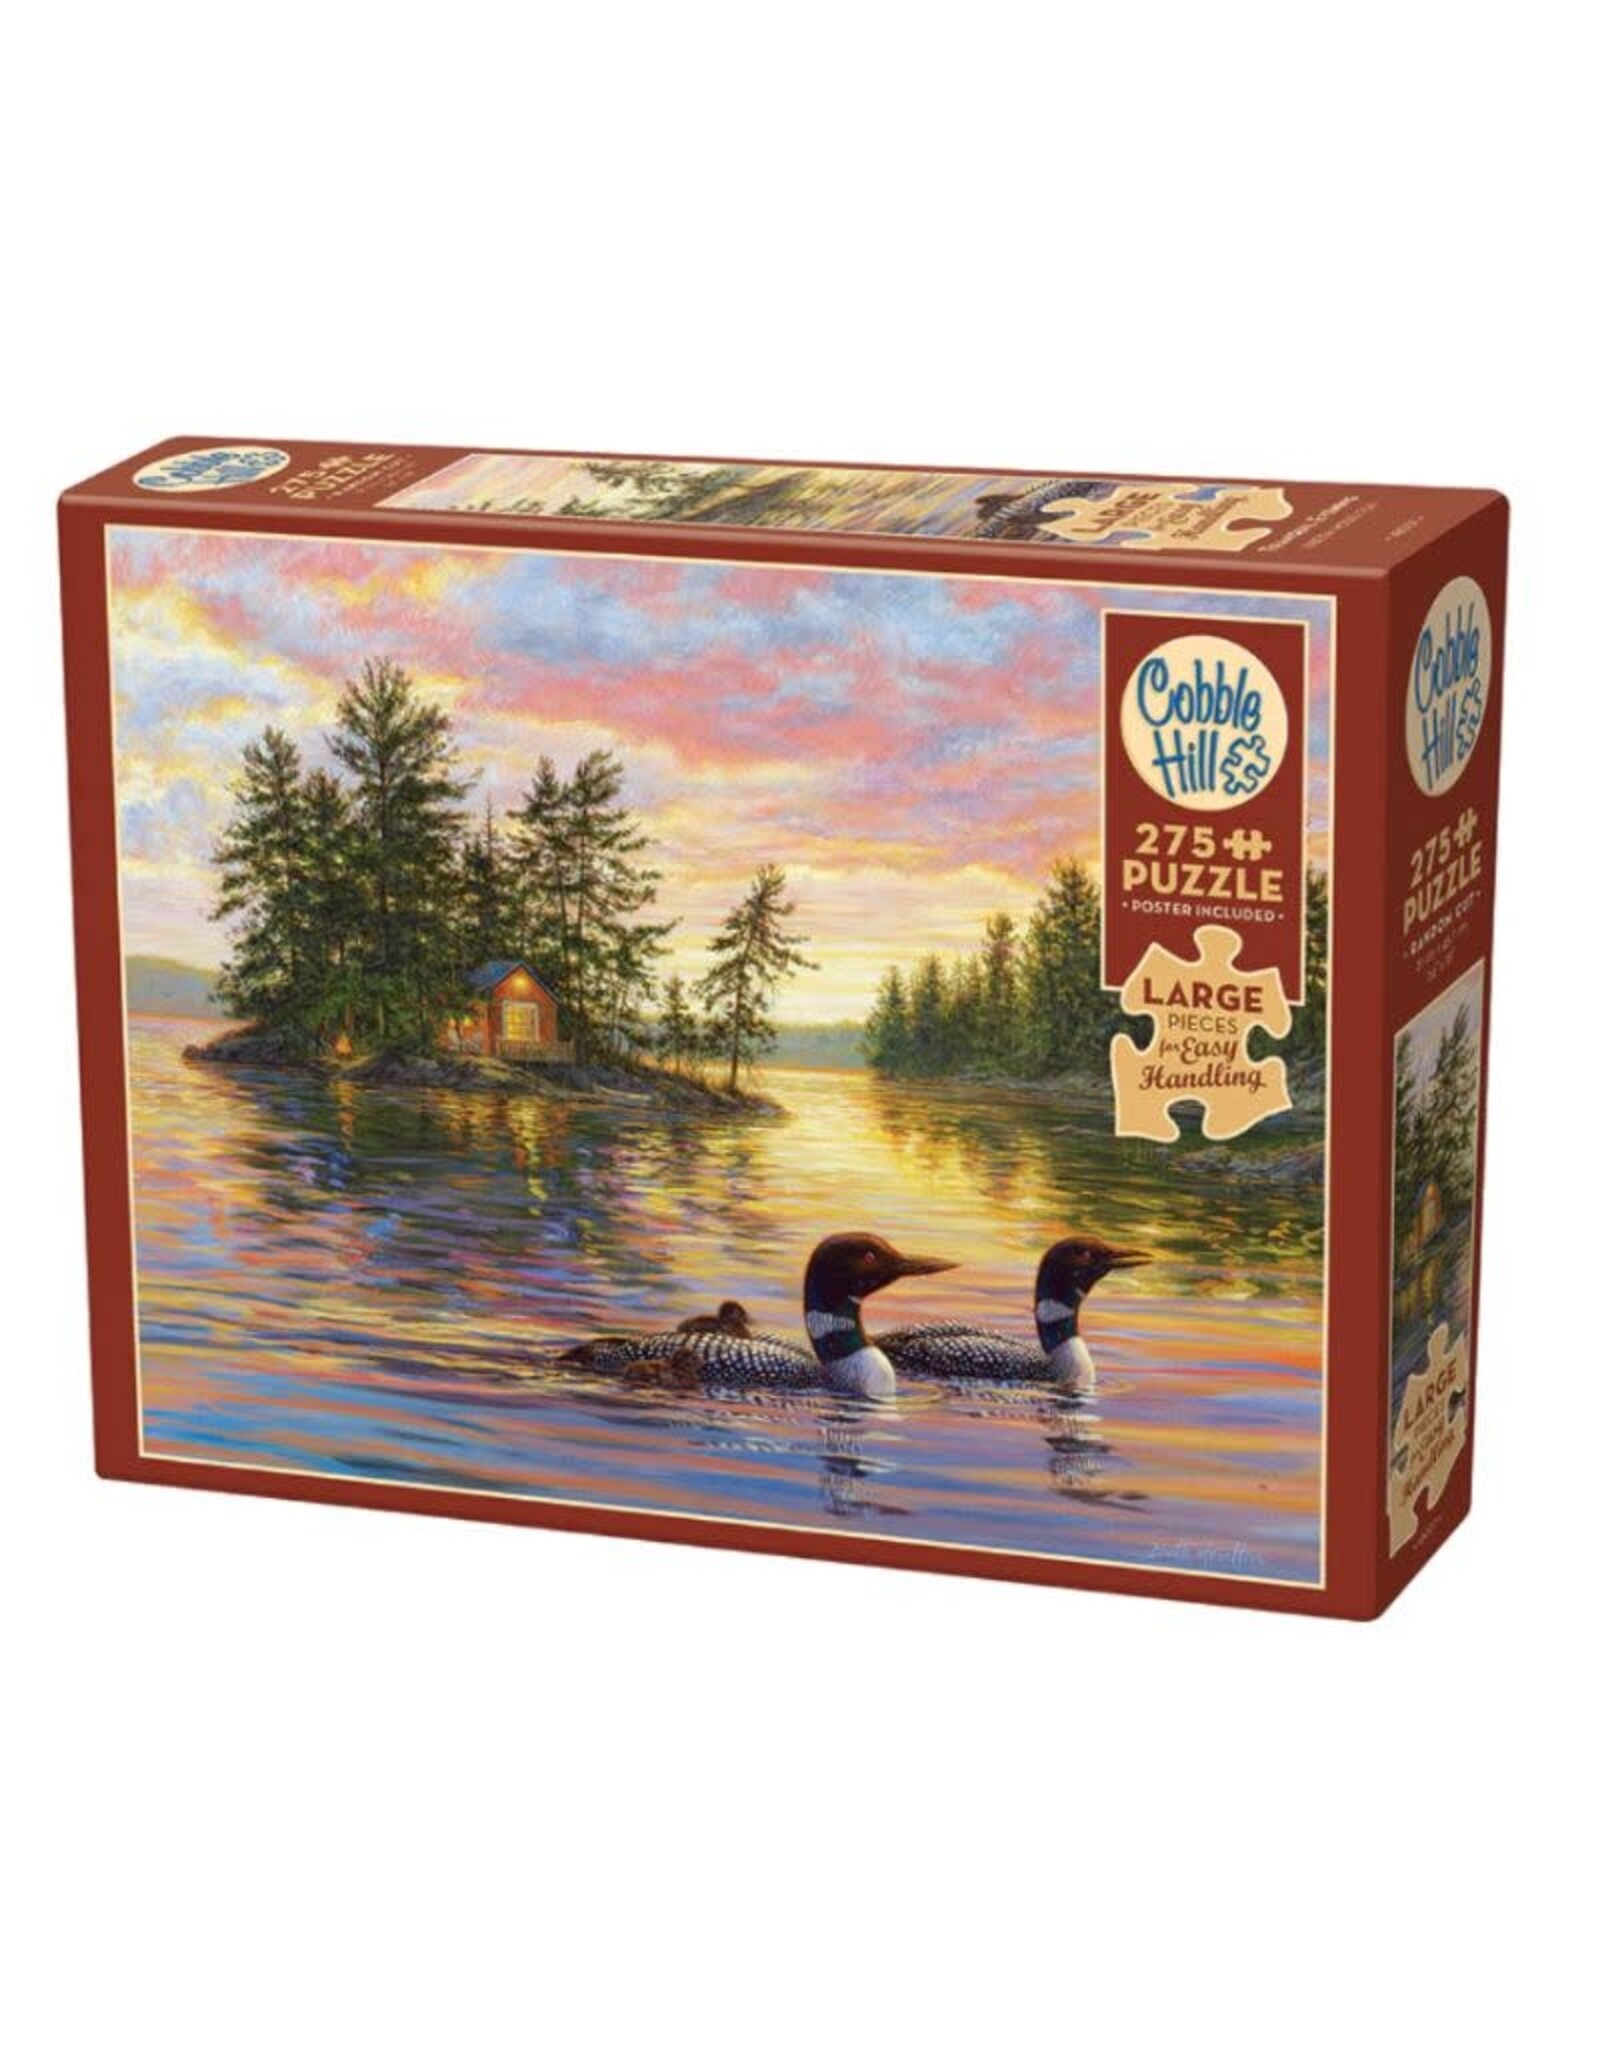 Cobble Hill Puzzles Cobble Hill 275pc Easy Handling Puzzles